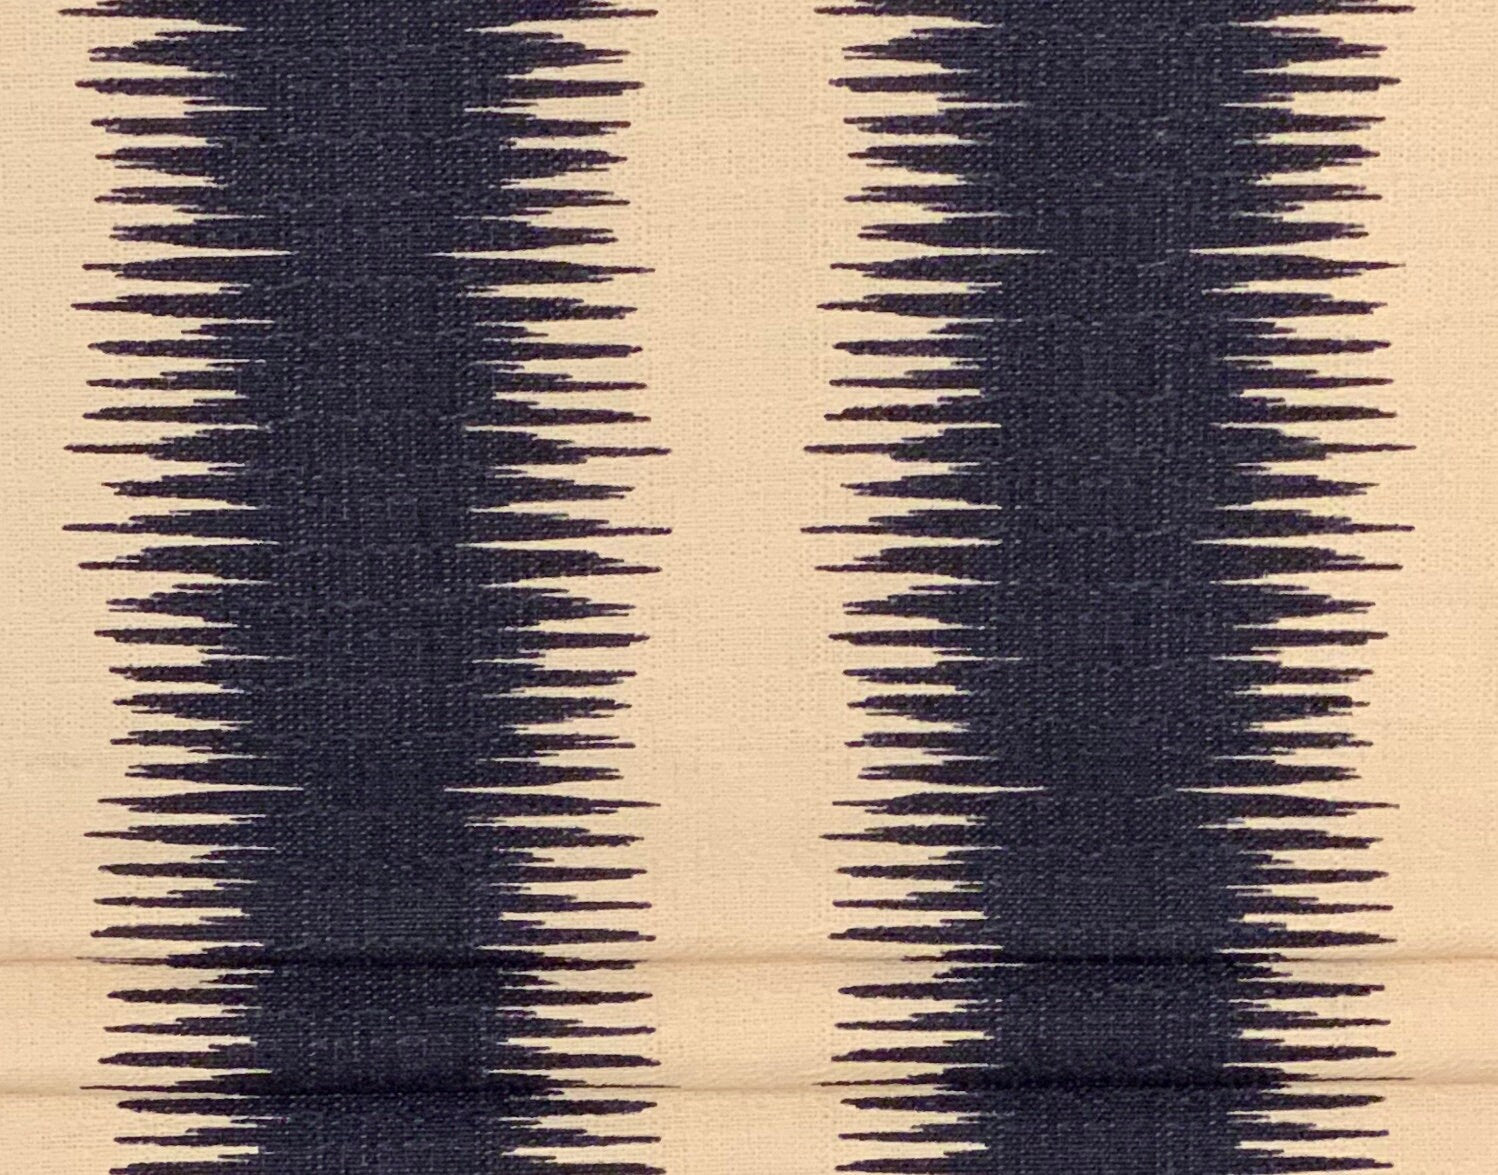 Faux Roman Shade Valance in Navy Blue Ikat Stripe on Birch/Ivory Textured Cotton (similar to bark cloth), Fully Lined, Custom Made Valance